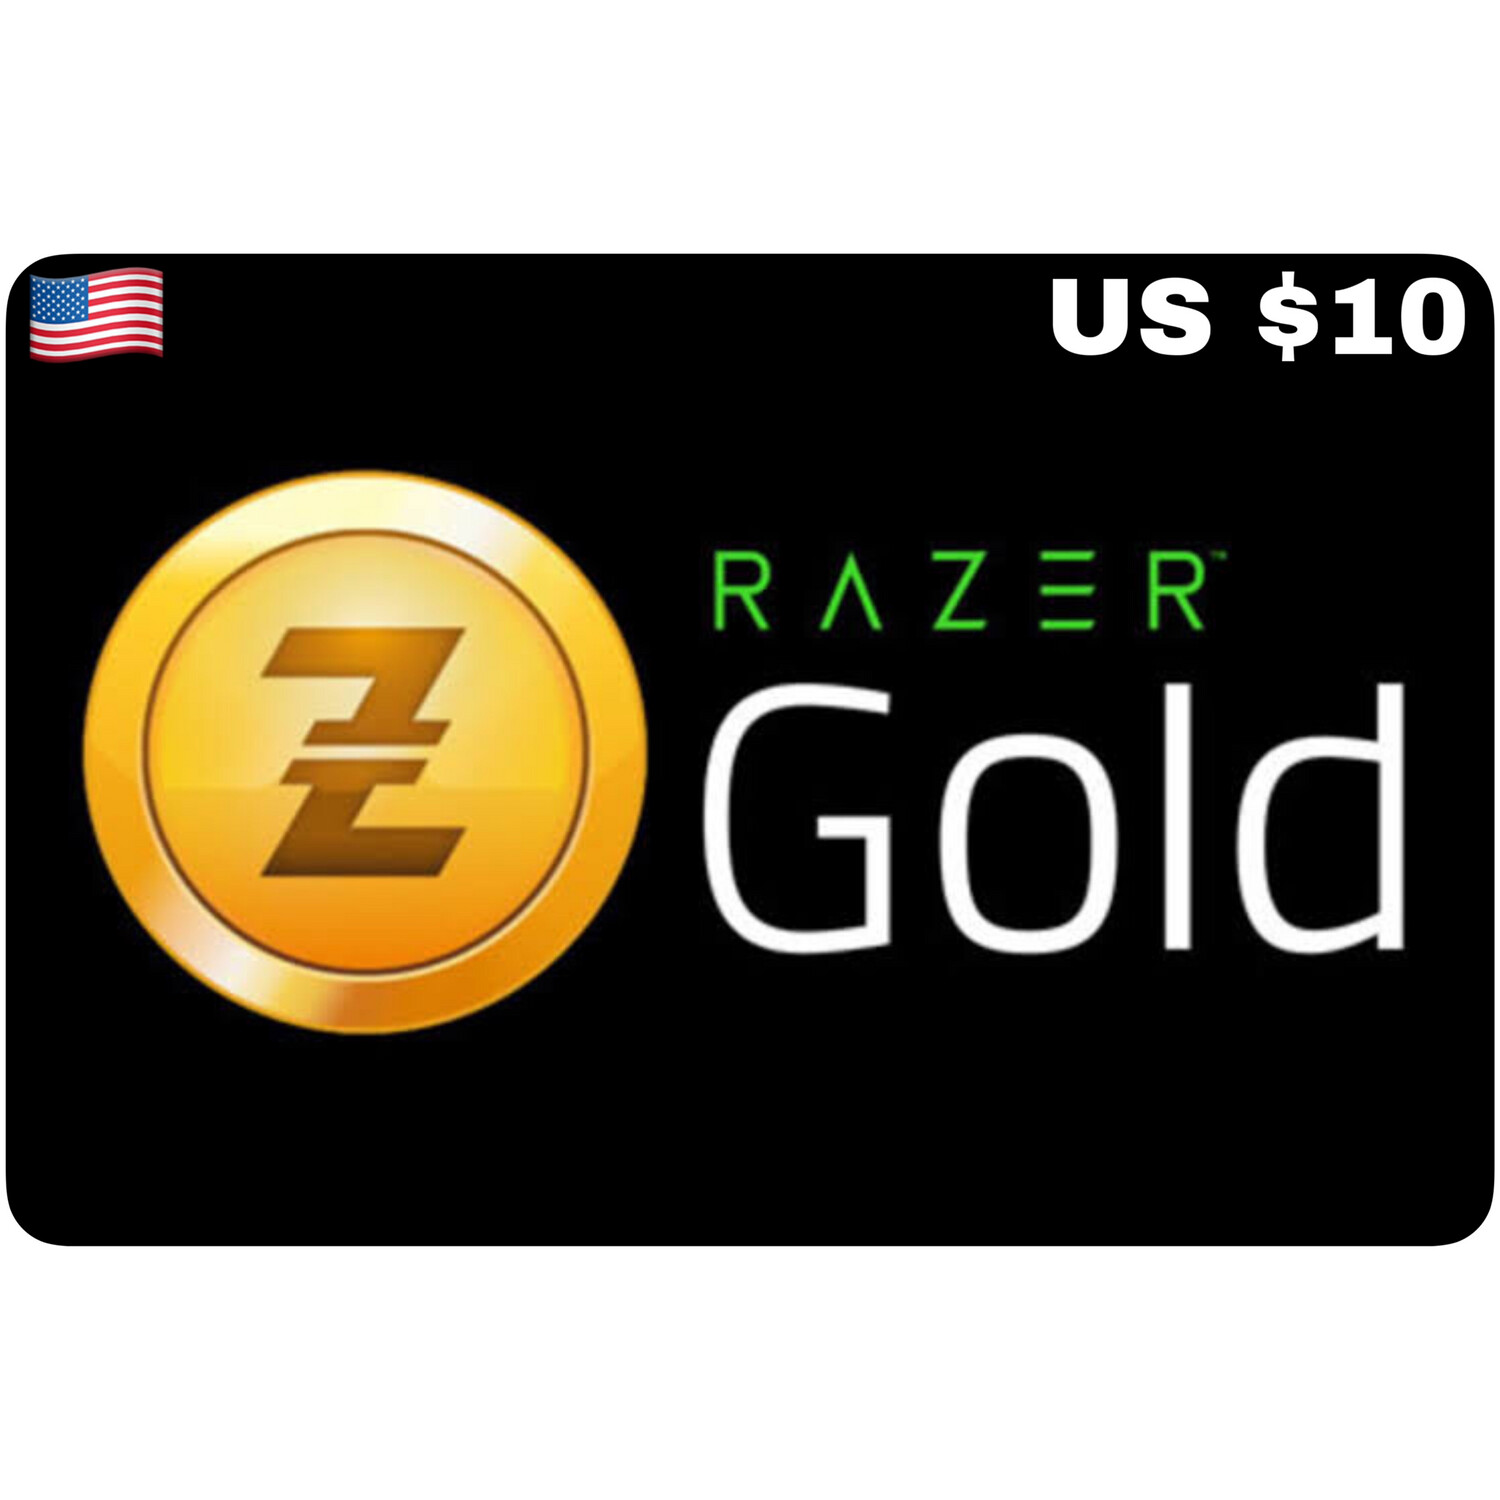 Razer Gold Pin US USD $10 Pin Only